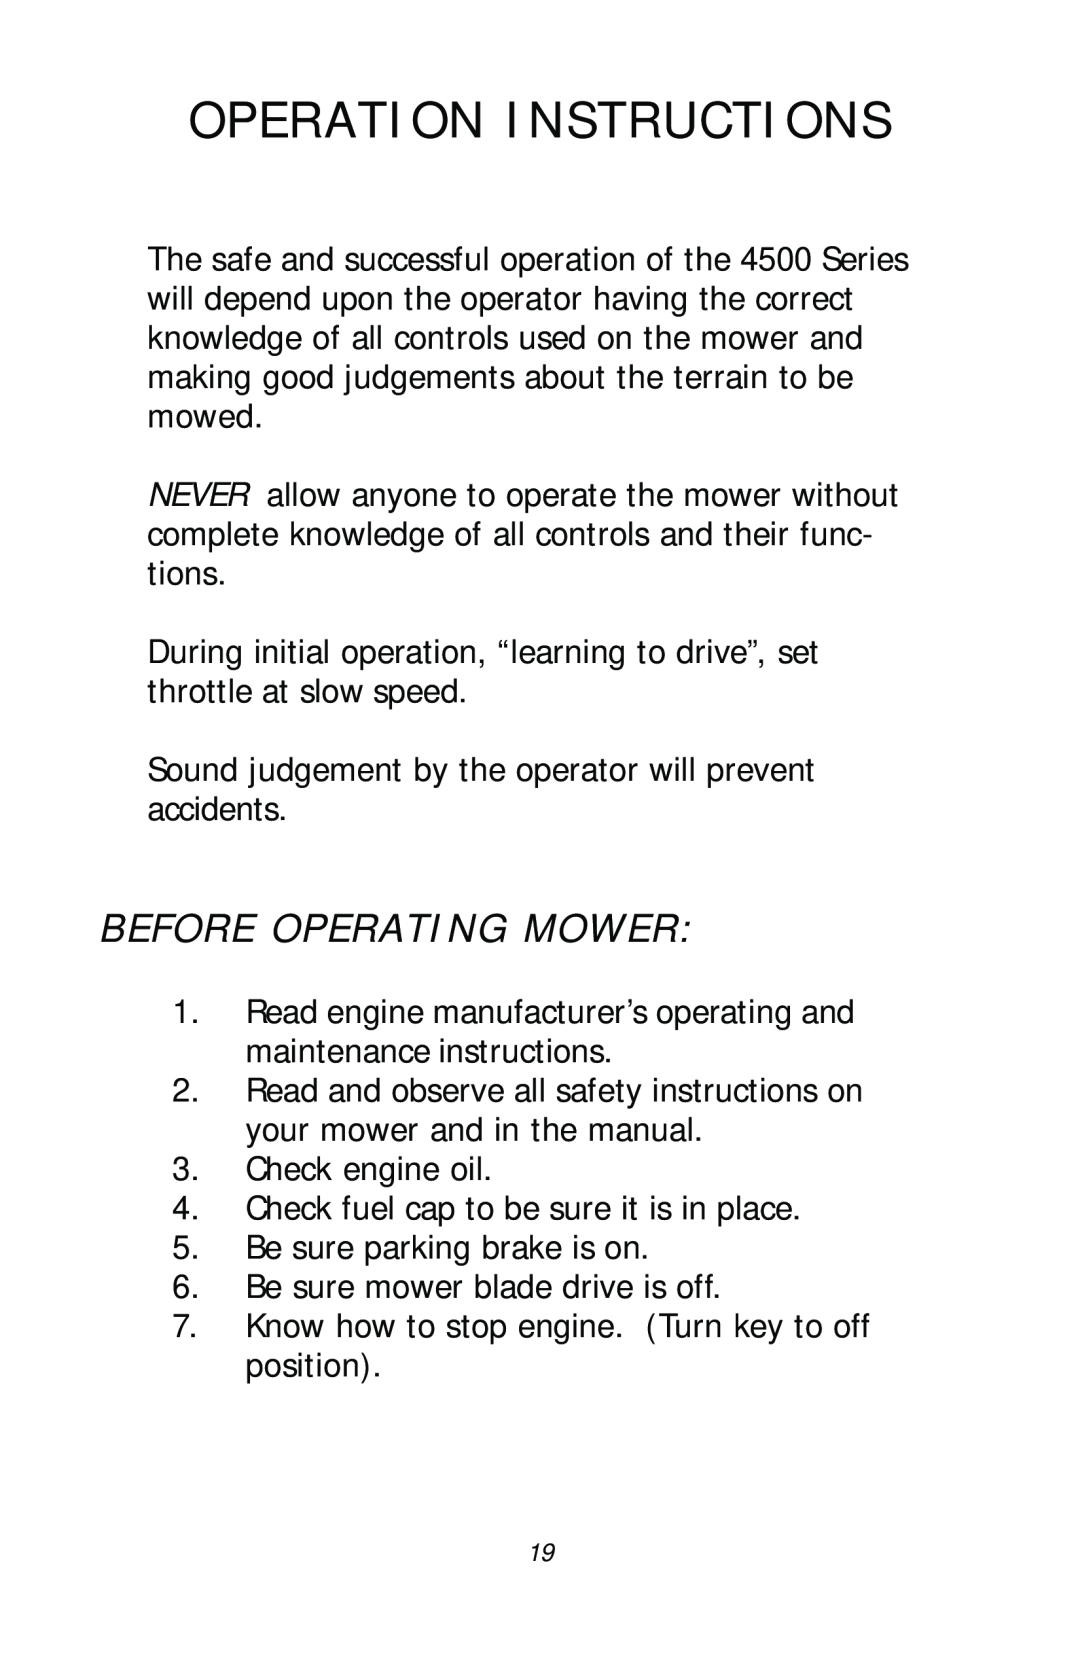 Dixon 13782-0503, ZTR 4516, ZTR 4515, ZTR 4518 manual Operation Instructions, Before Operating Mower 